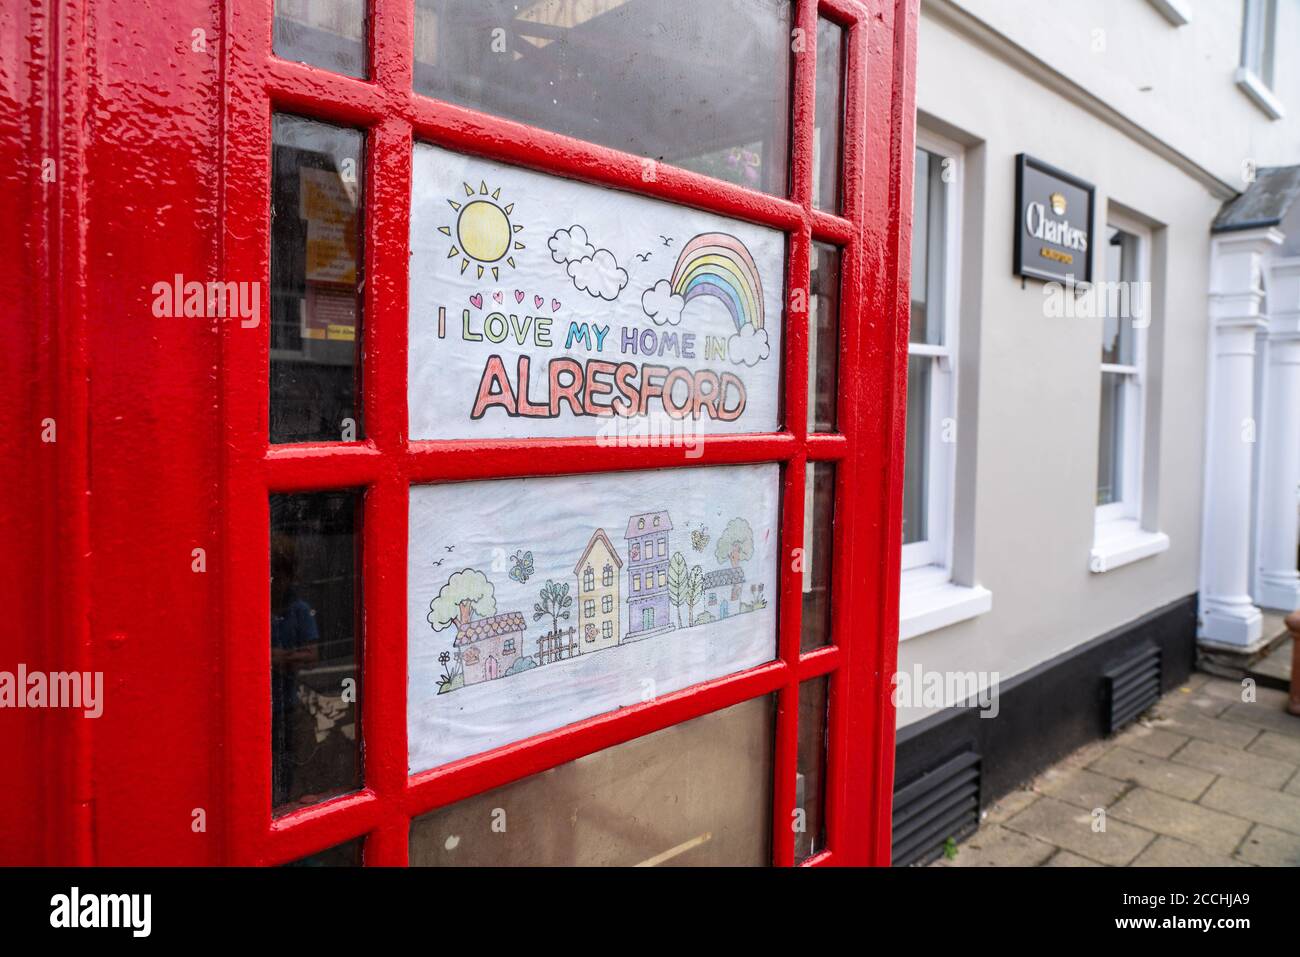 'I love my home in Alresford'. Child's drawing in telephone box with rainbow. Spreading hope during Covid 19 crisis. Stock Photo